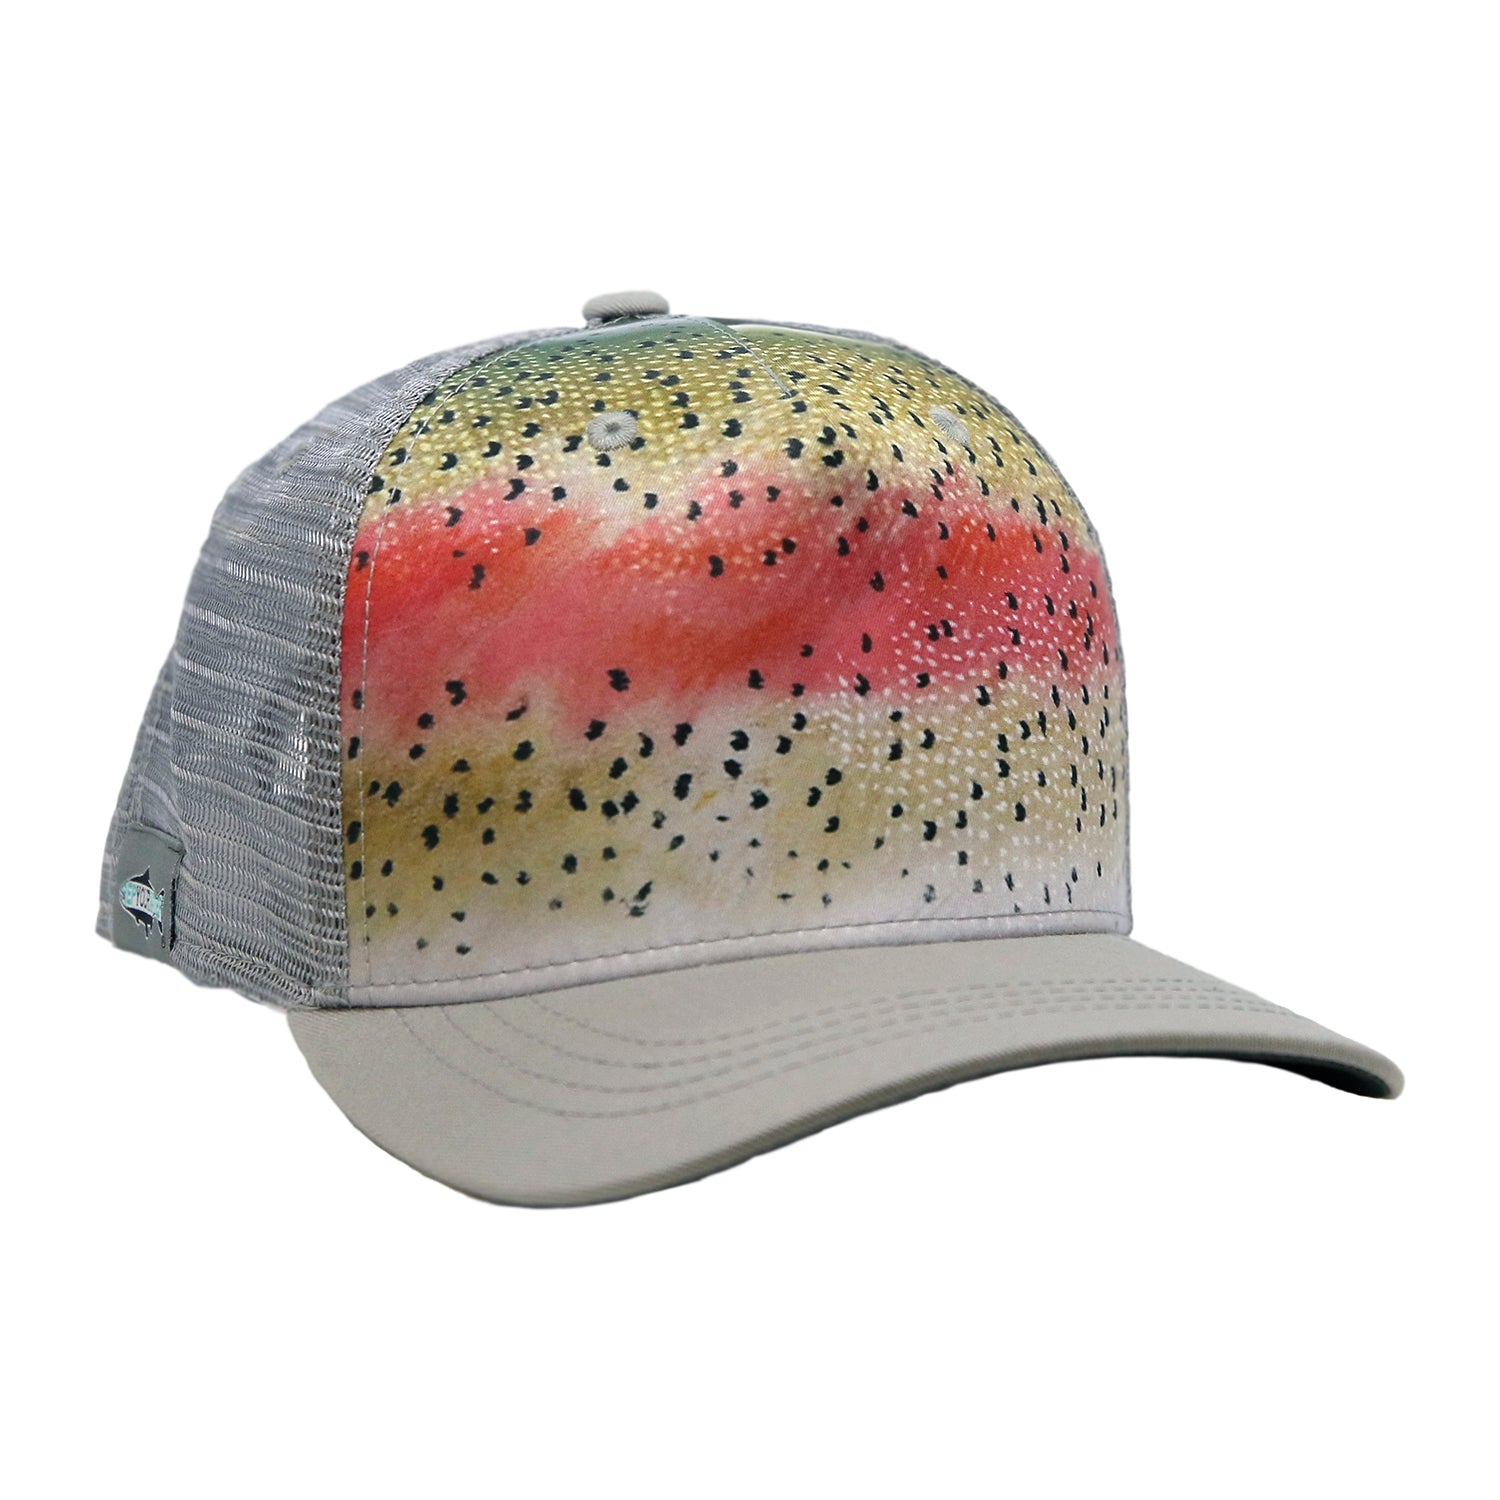 A hat with light grey mesh back and rainbow trout print front with repyourwater logo on the side